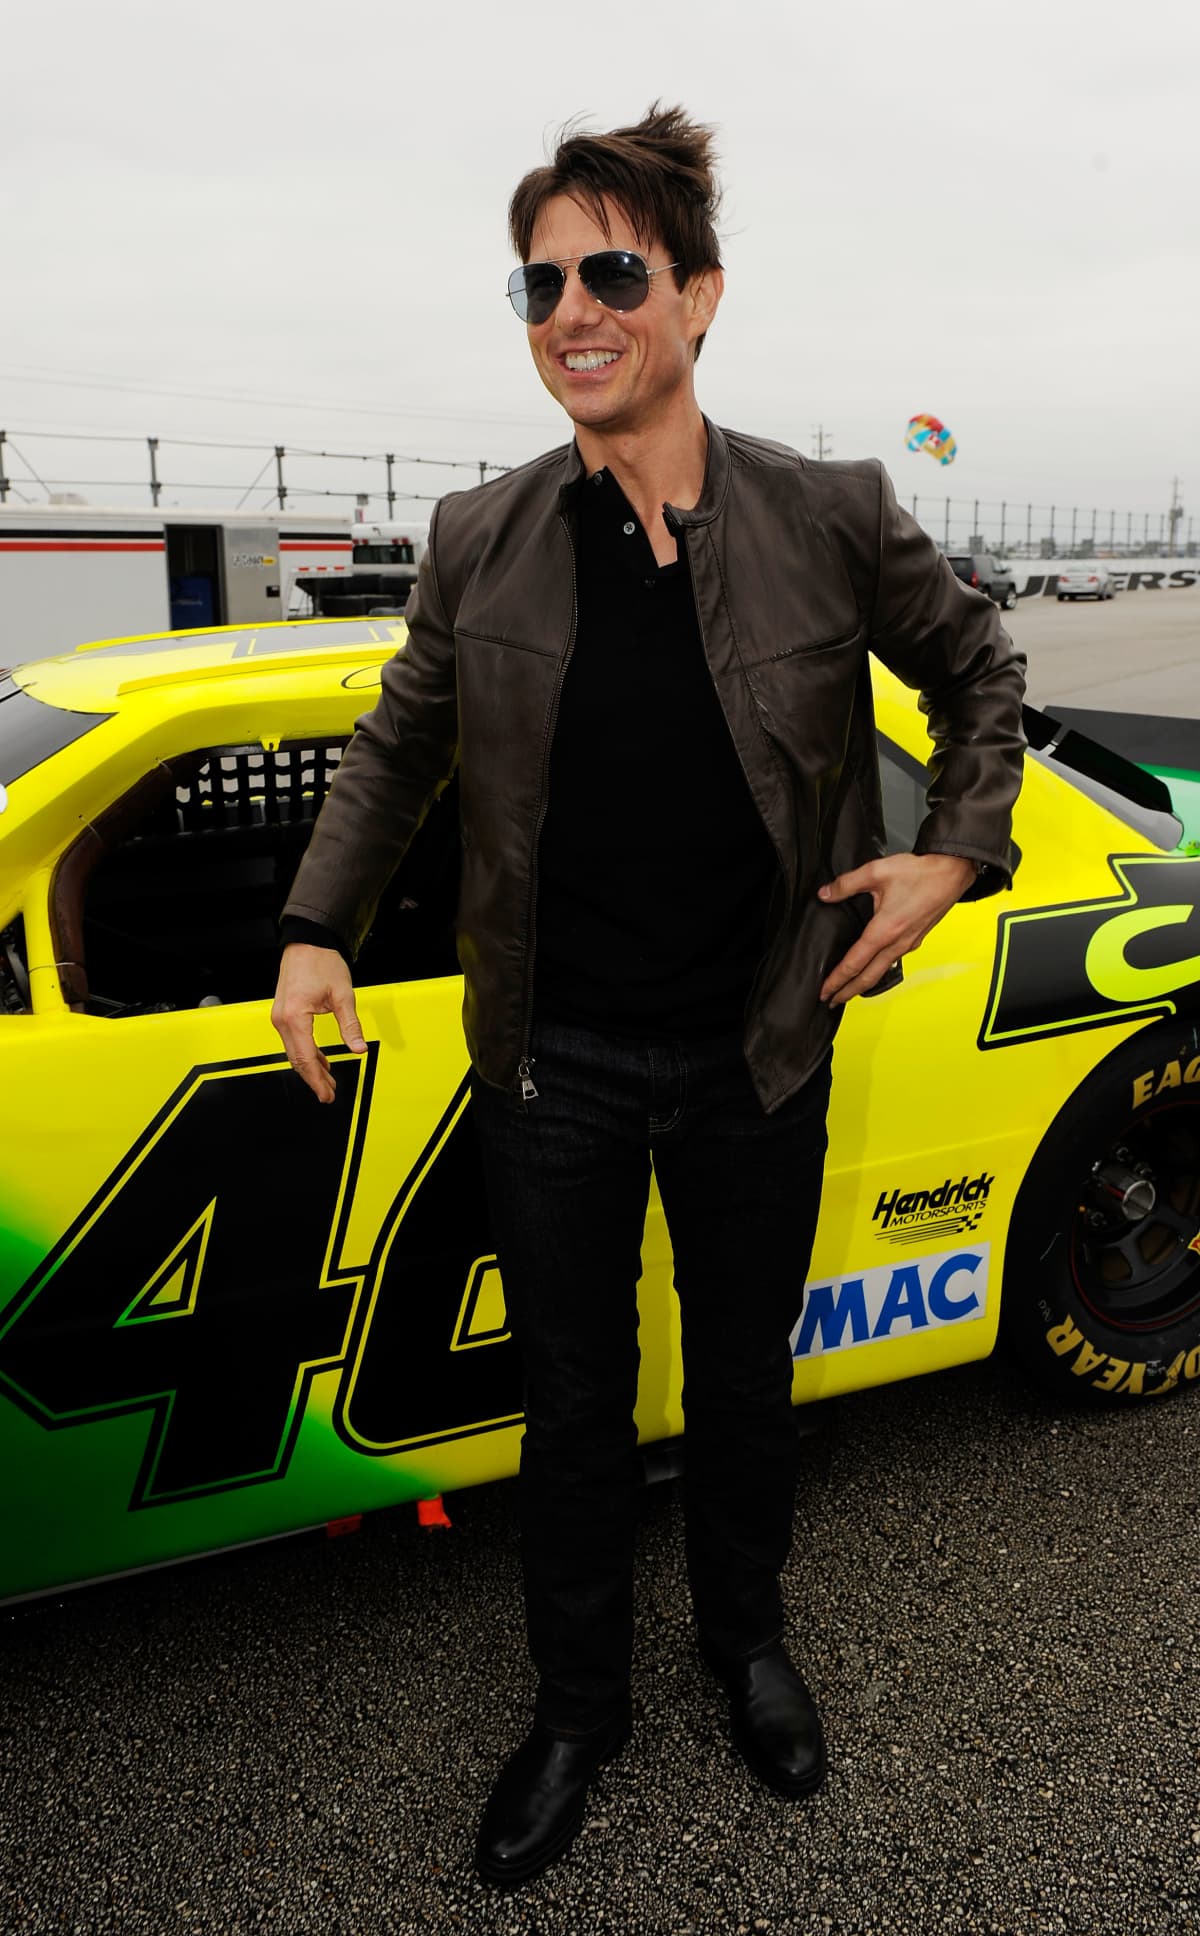 DAYTONA BEACH, FL - FEBRUARY 15:  Actor Tom Cruise poses in front of the car used in the film "Days of Thunder" on track prior to the start of the NASCAR Sprint Cup Series Daytona 500 at Daytona International Speedway on February 15, 2009 in Daytona Beach, Florida.  (Photo by Rusty Jarrett/Getty Images for NASCAR)